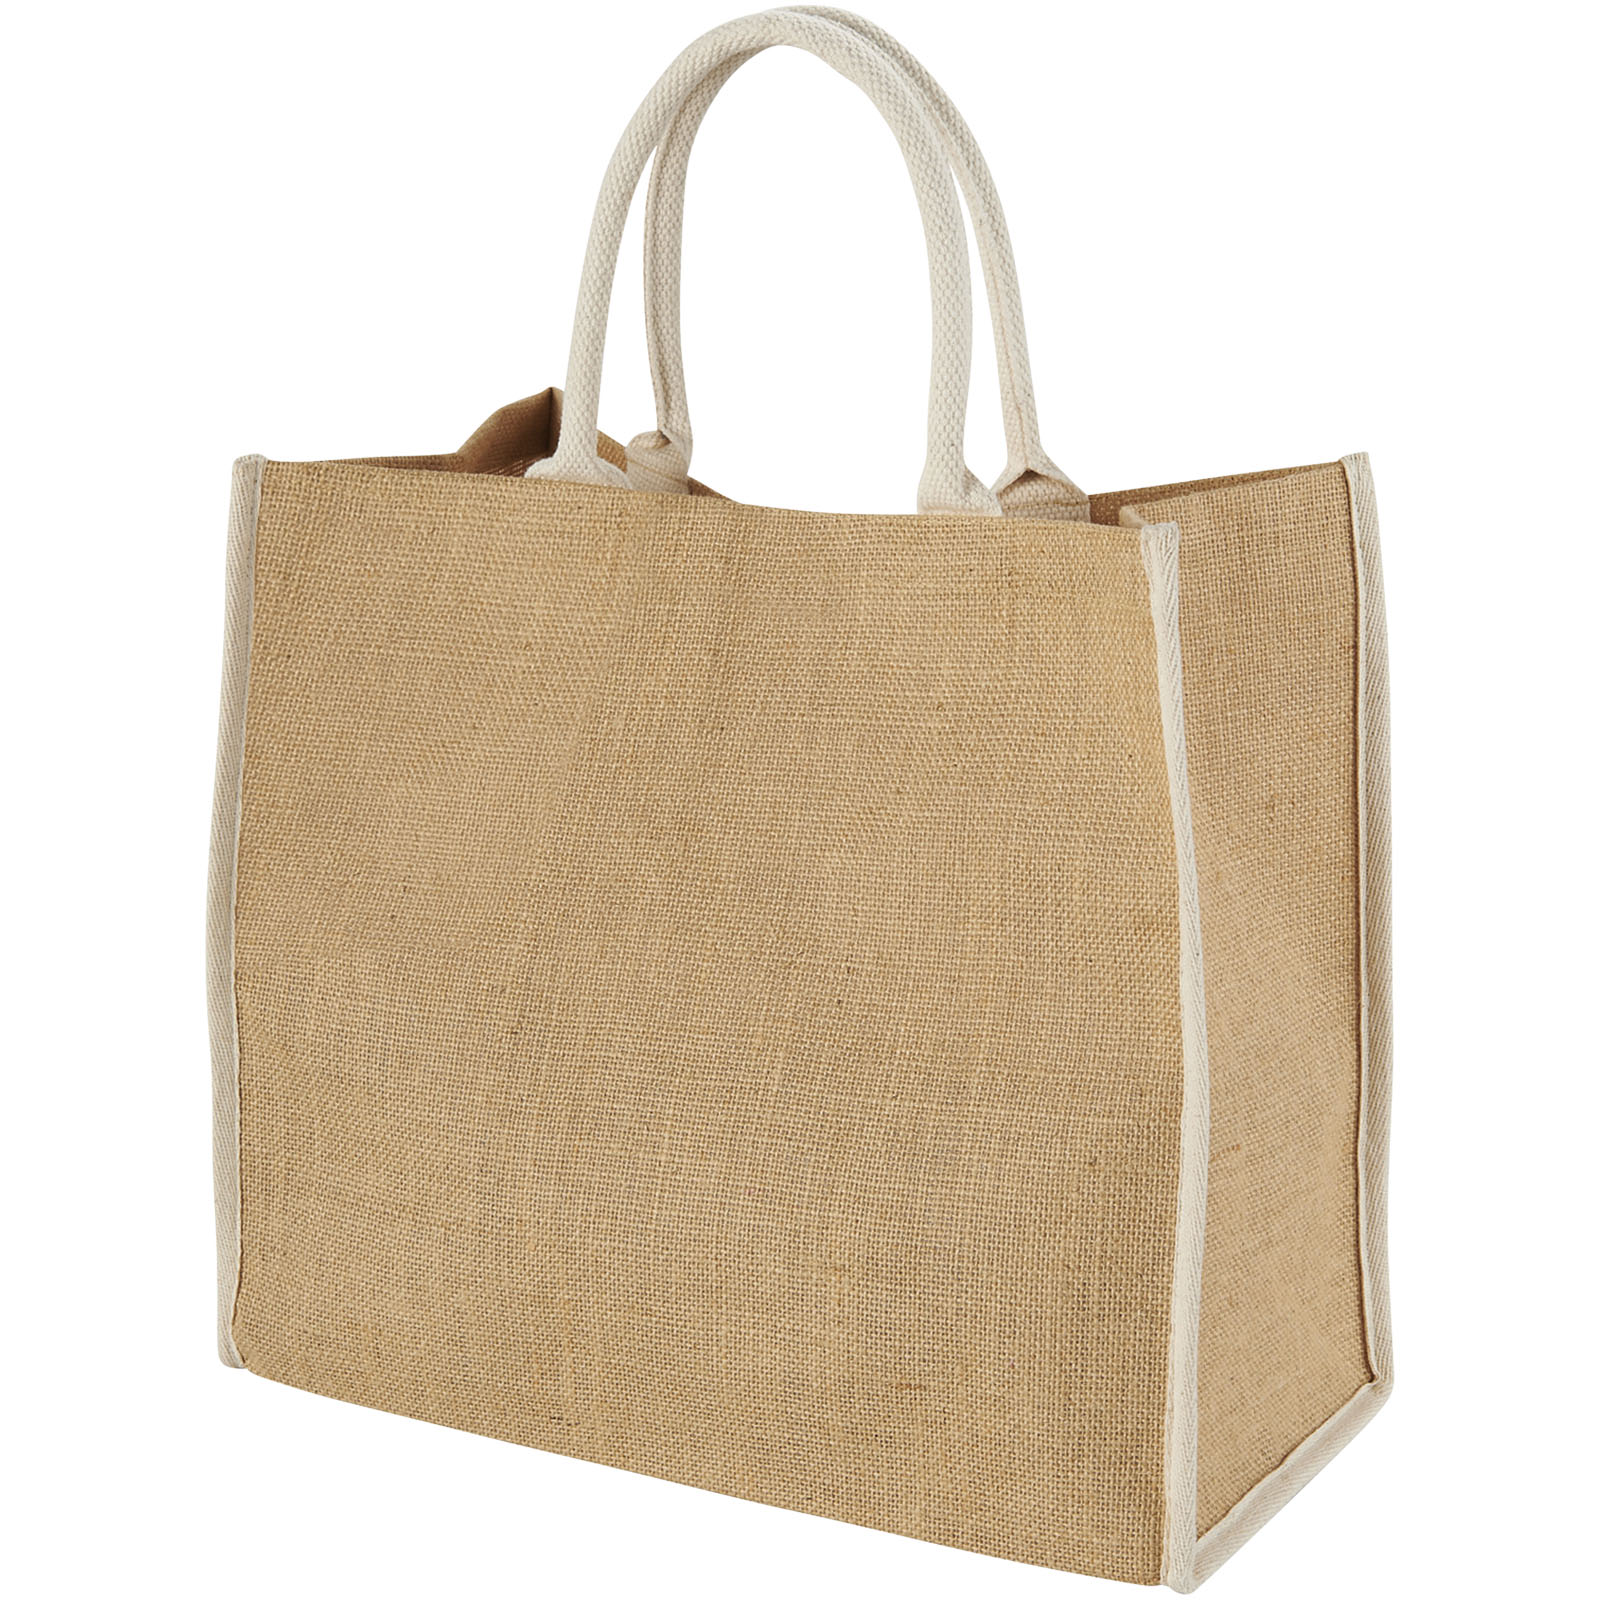 Advertising Shopping & Tote Bags - Harry coloured edge jute tote bag 25L